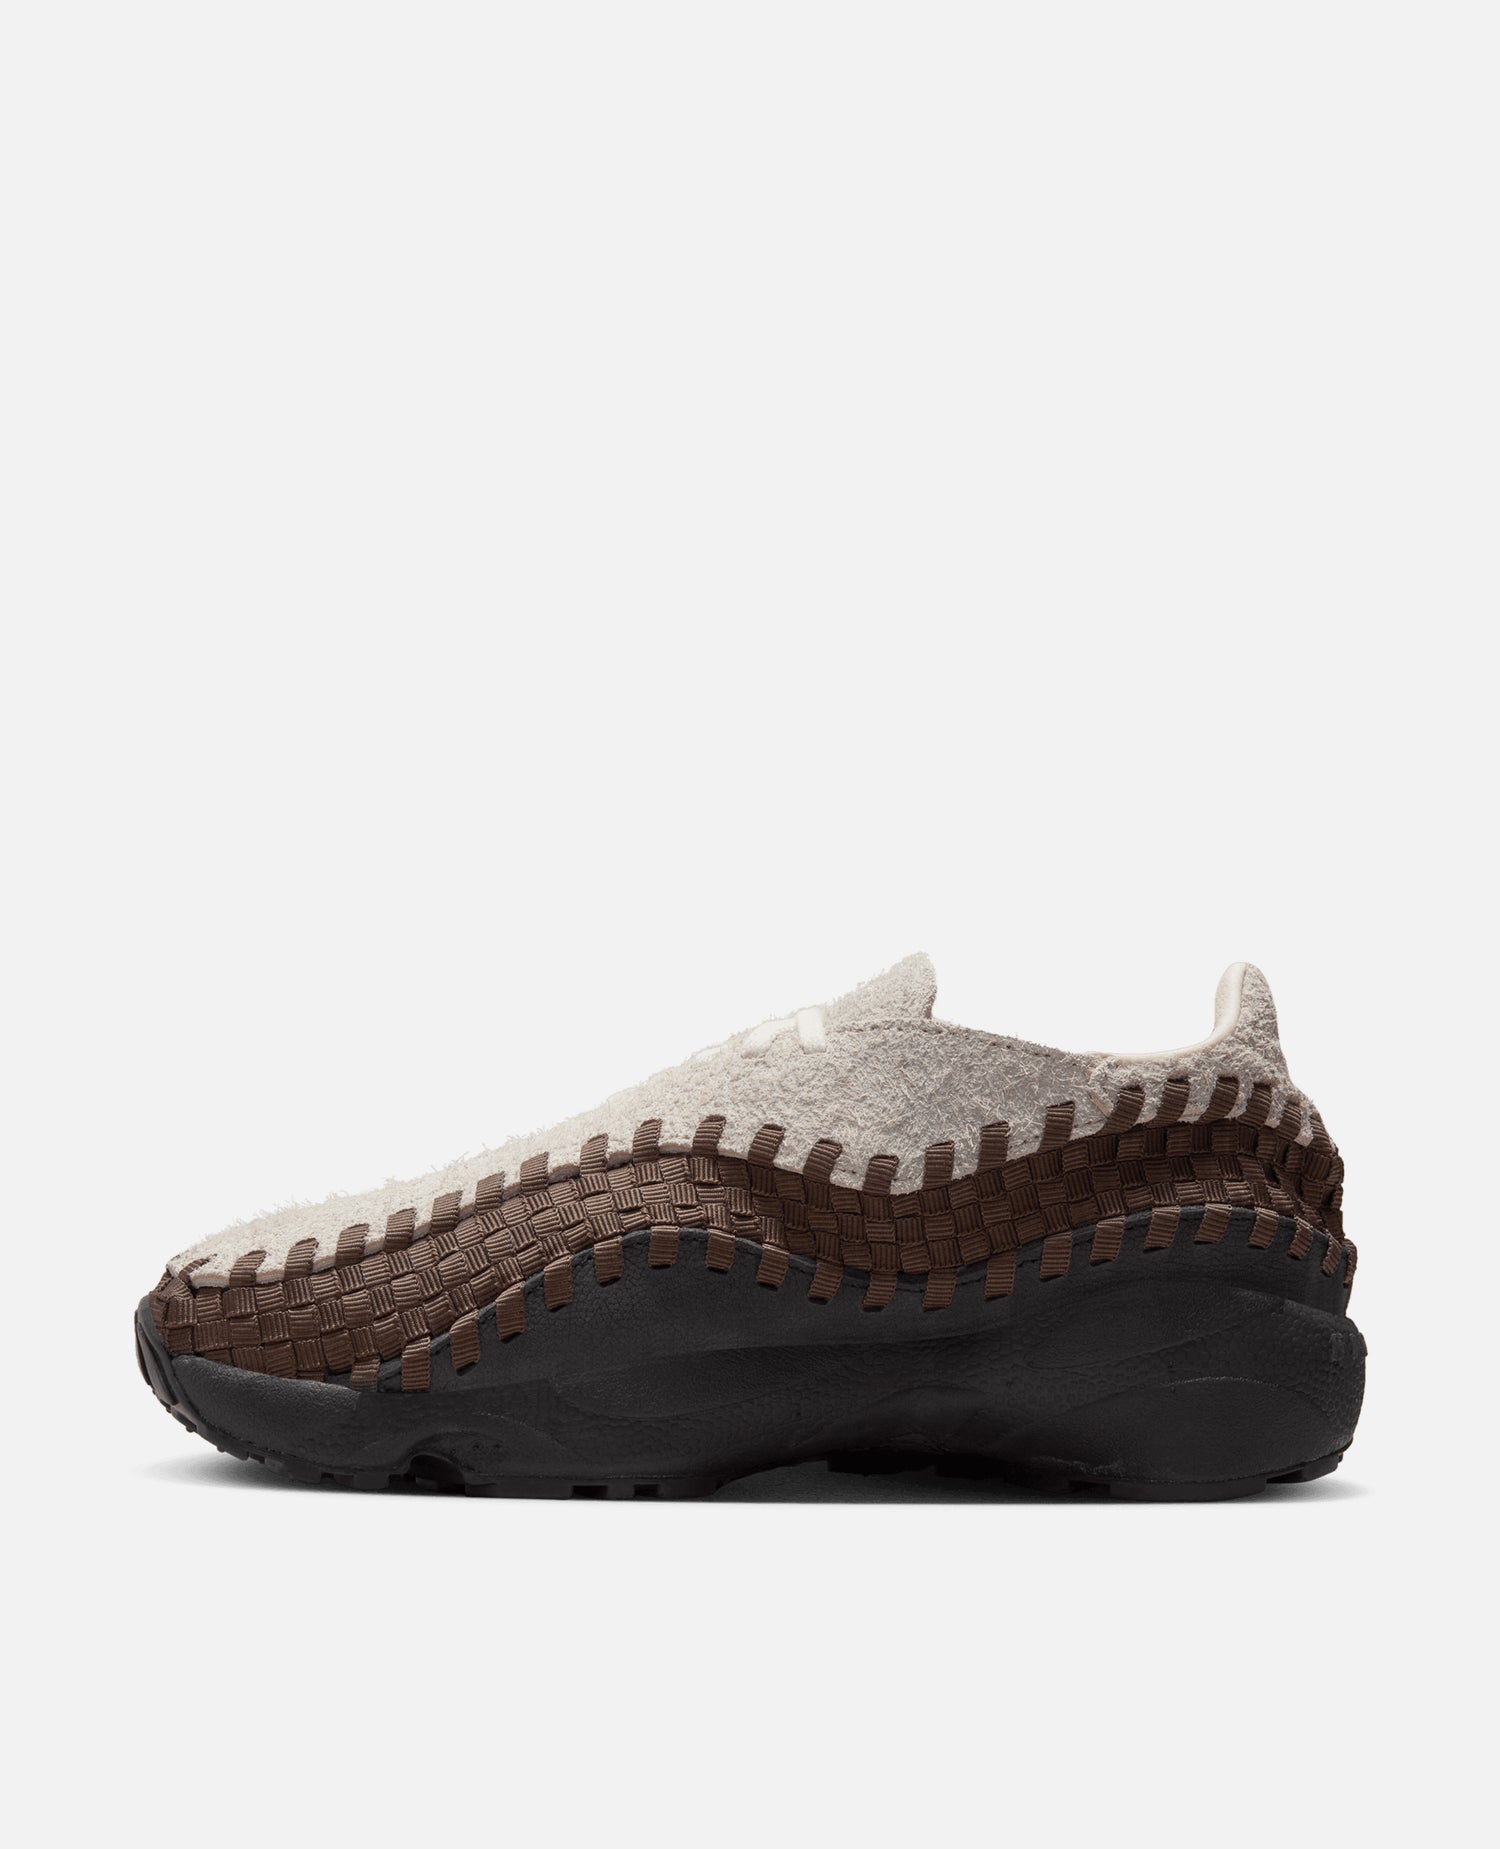 Nike Air Footscape Woven (Lt Orewood Brown/Coconut Milk)